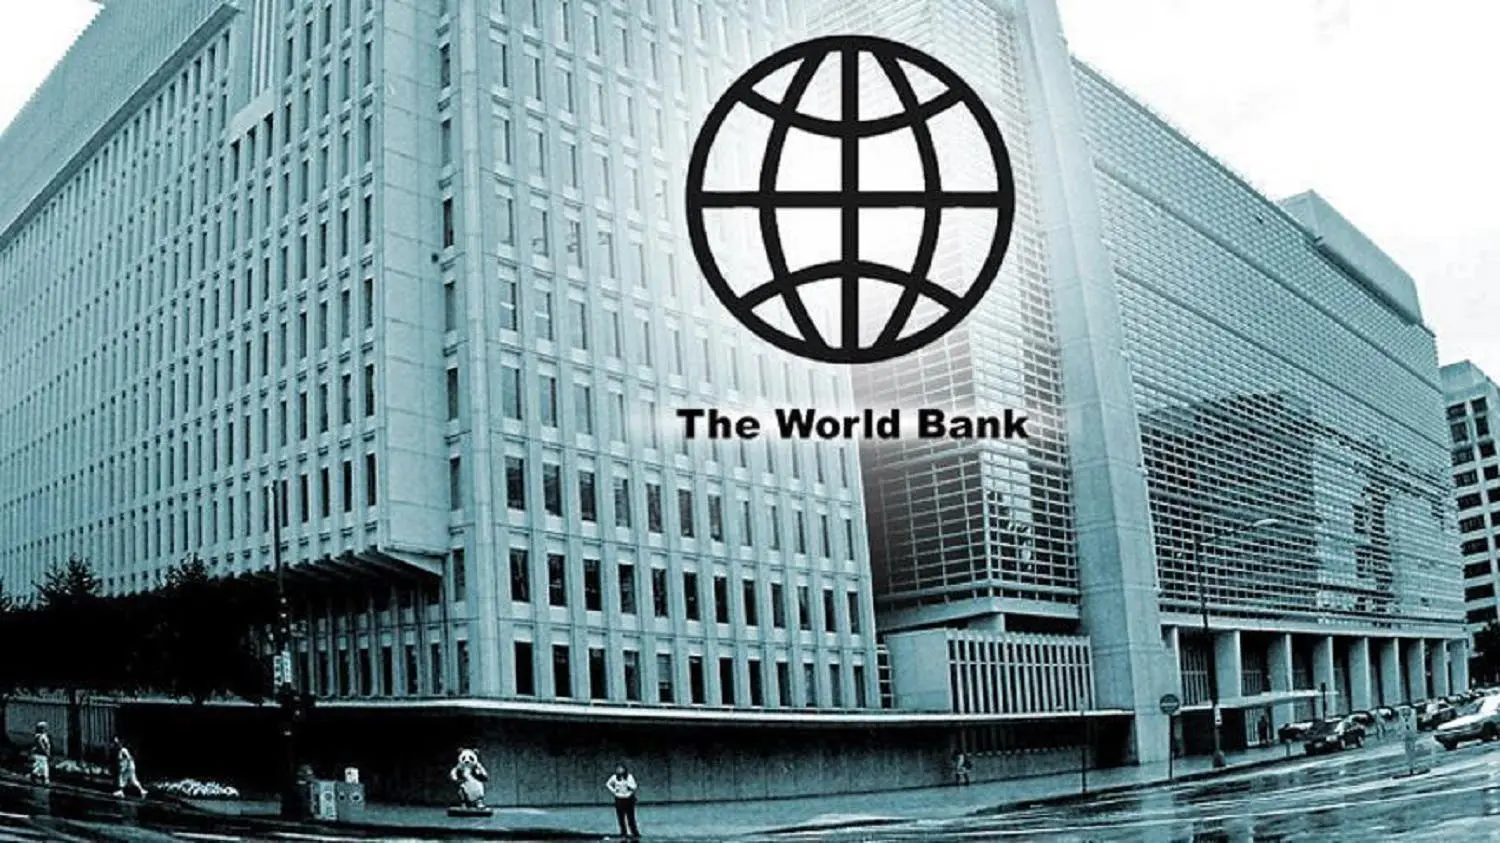 Osun Govt commends World Bank for role in community development